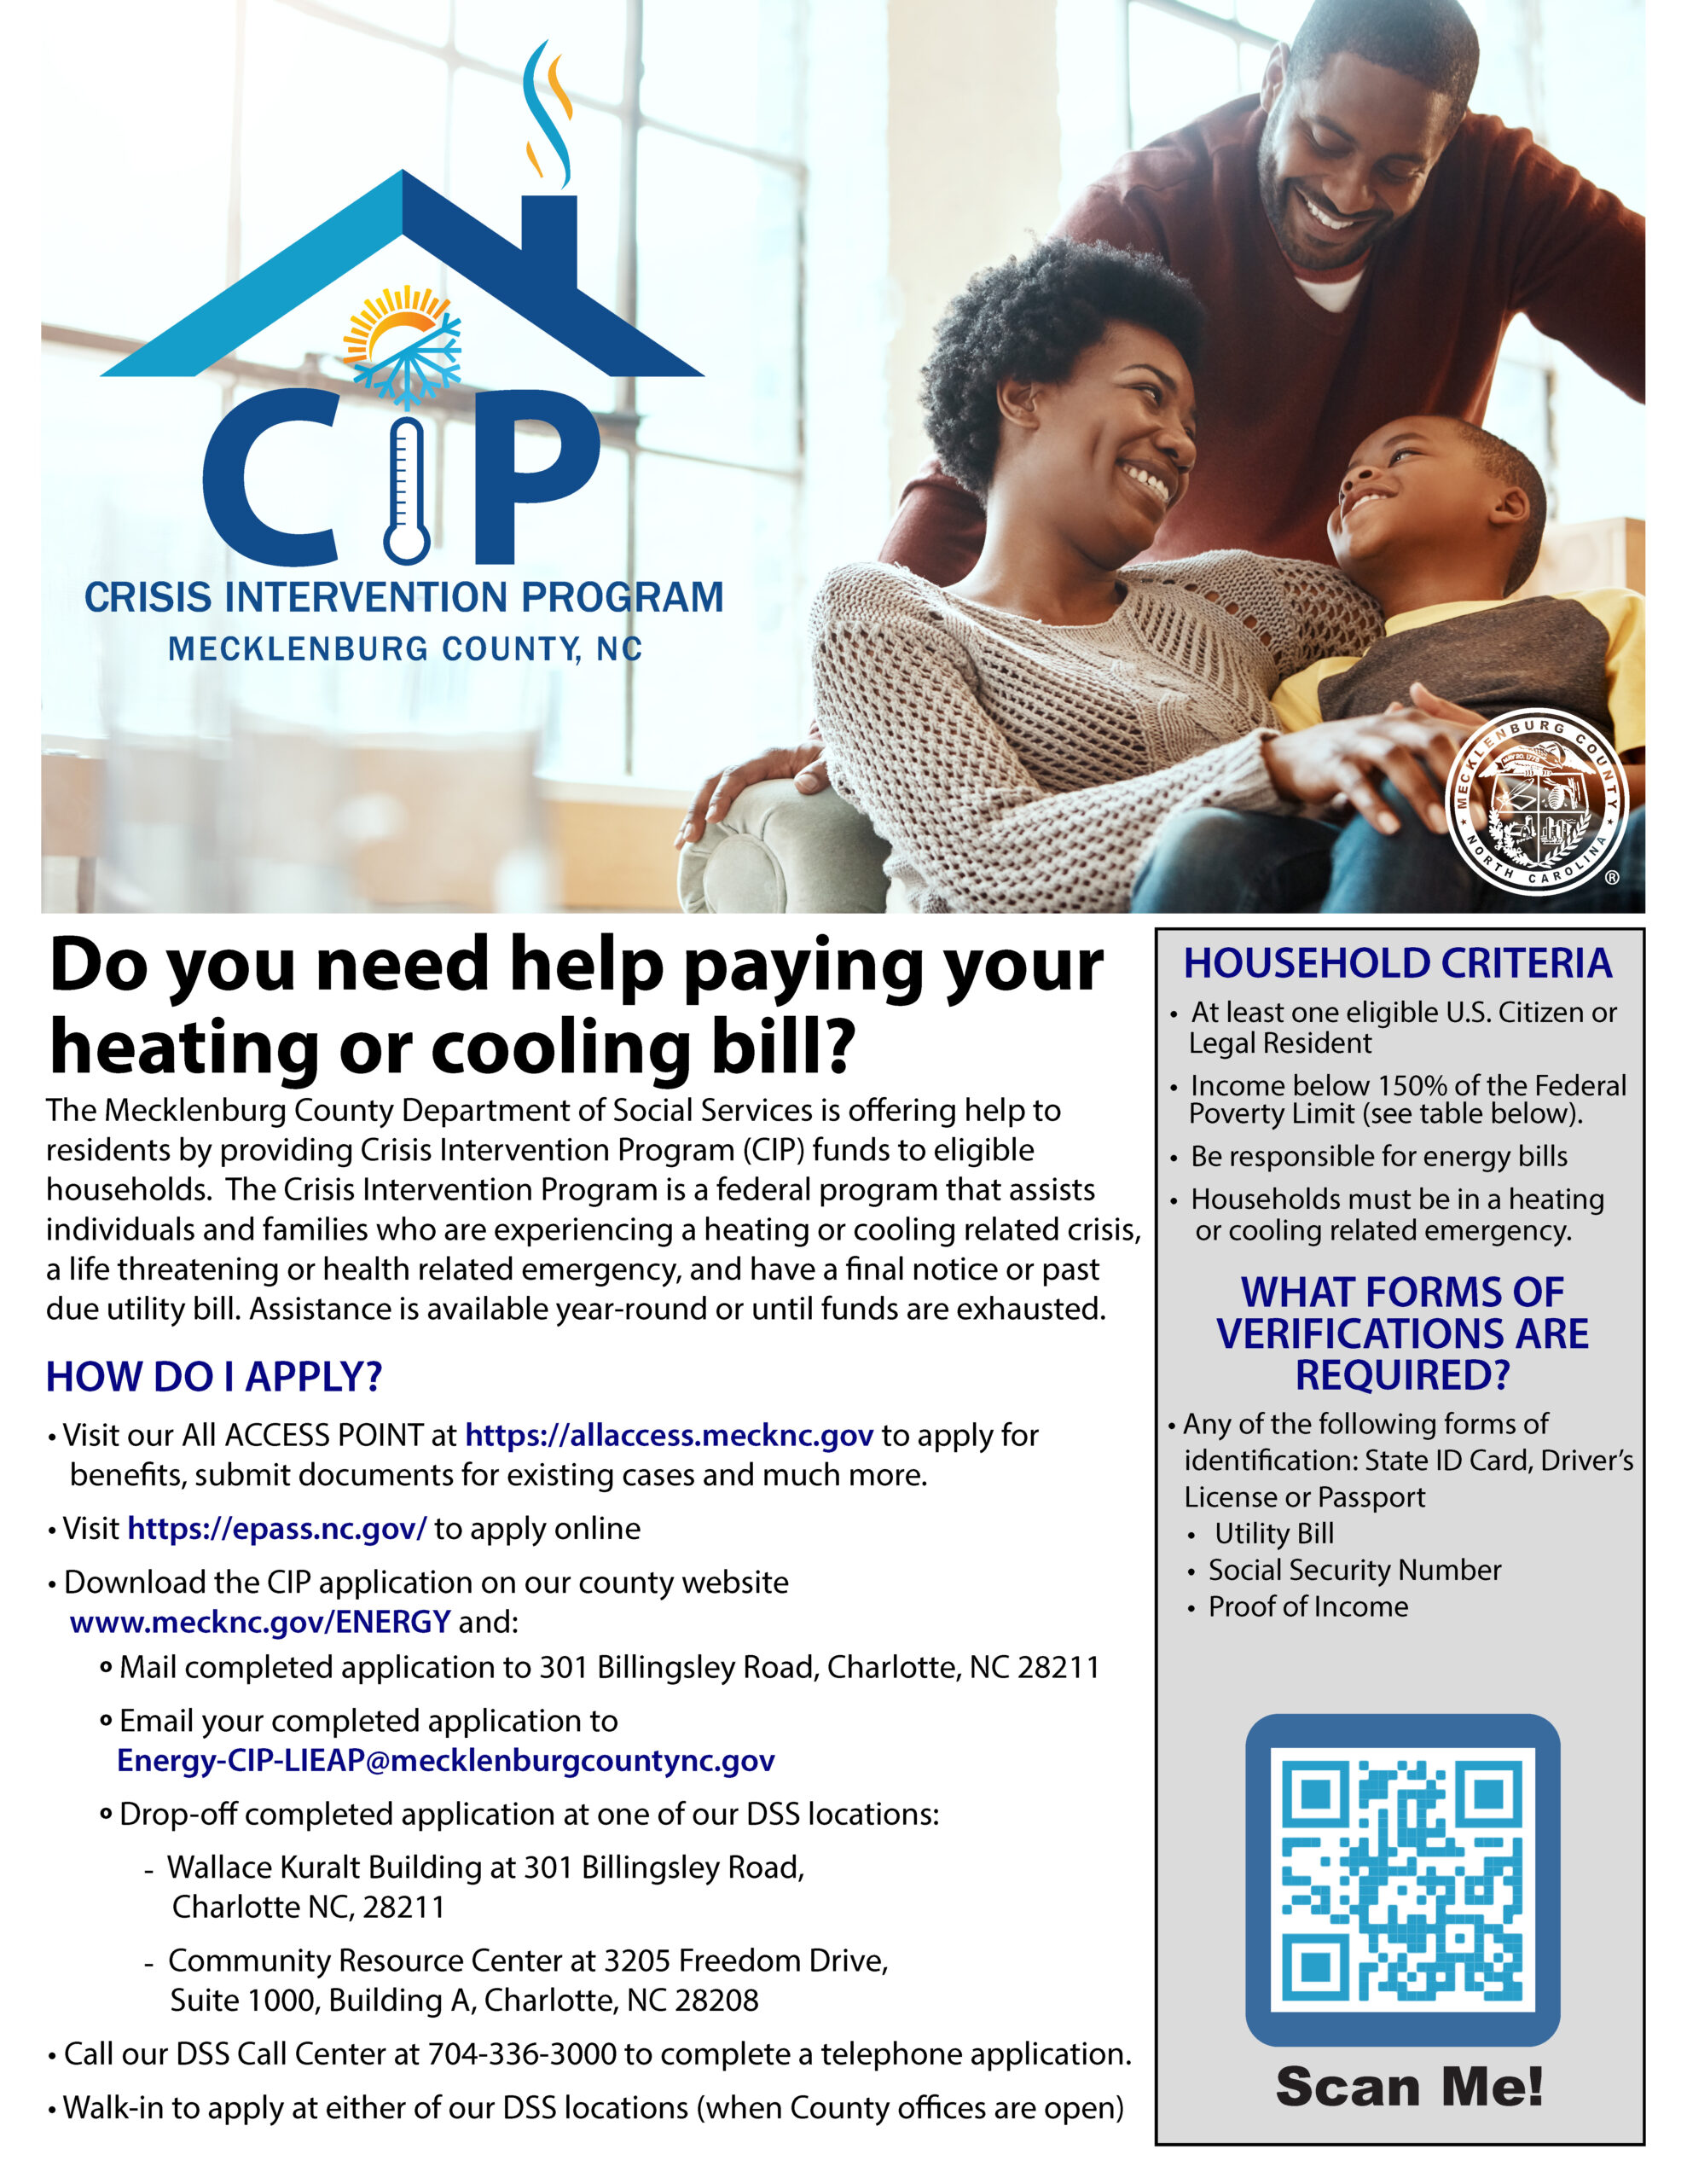 Assistance available in heating bill emergencies